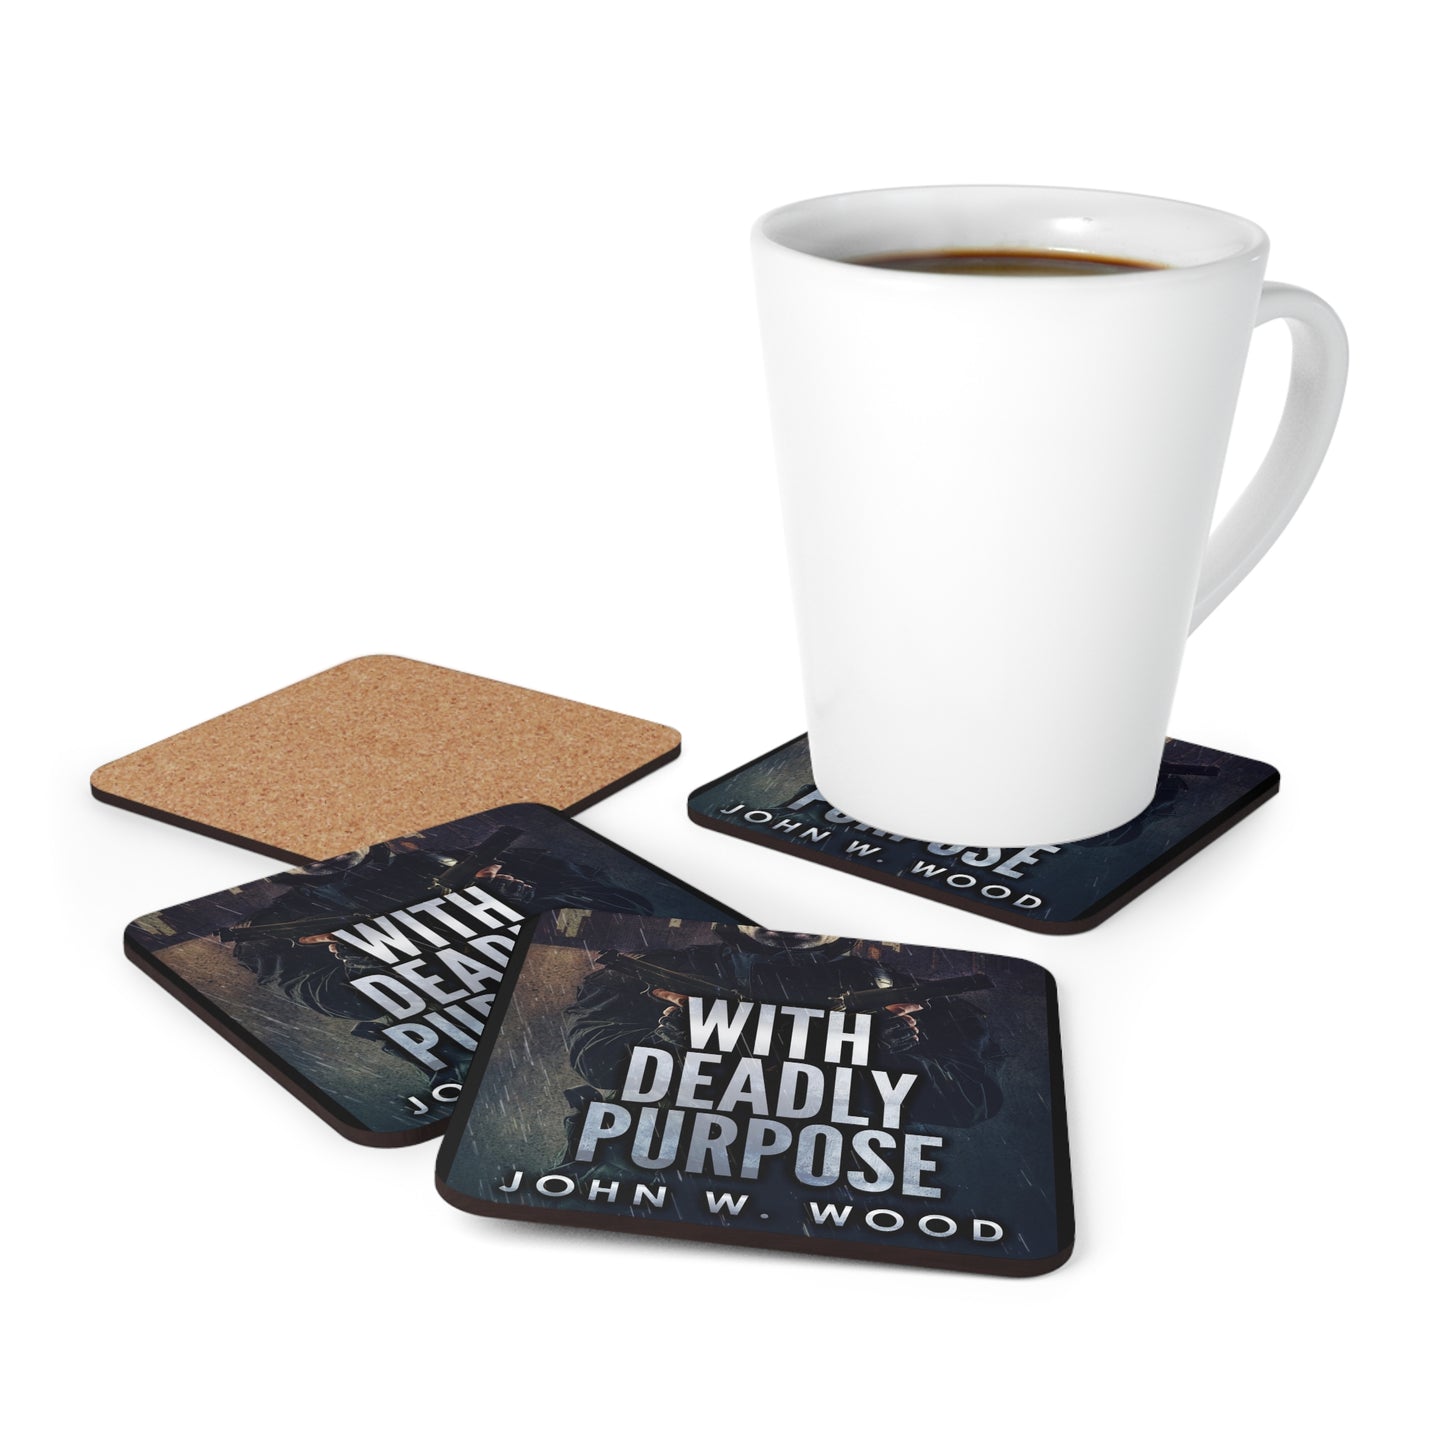 With Deadly Purpose - Corkwood Coaster Set